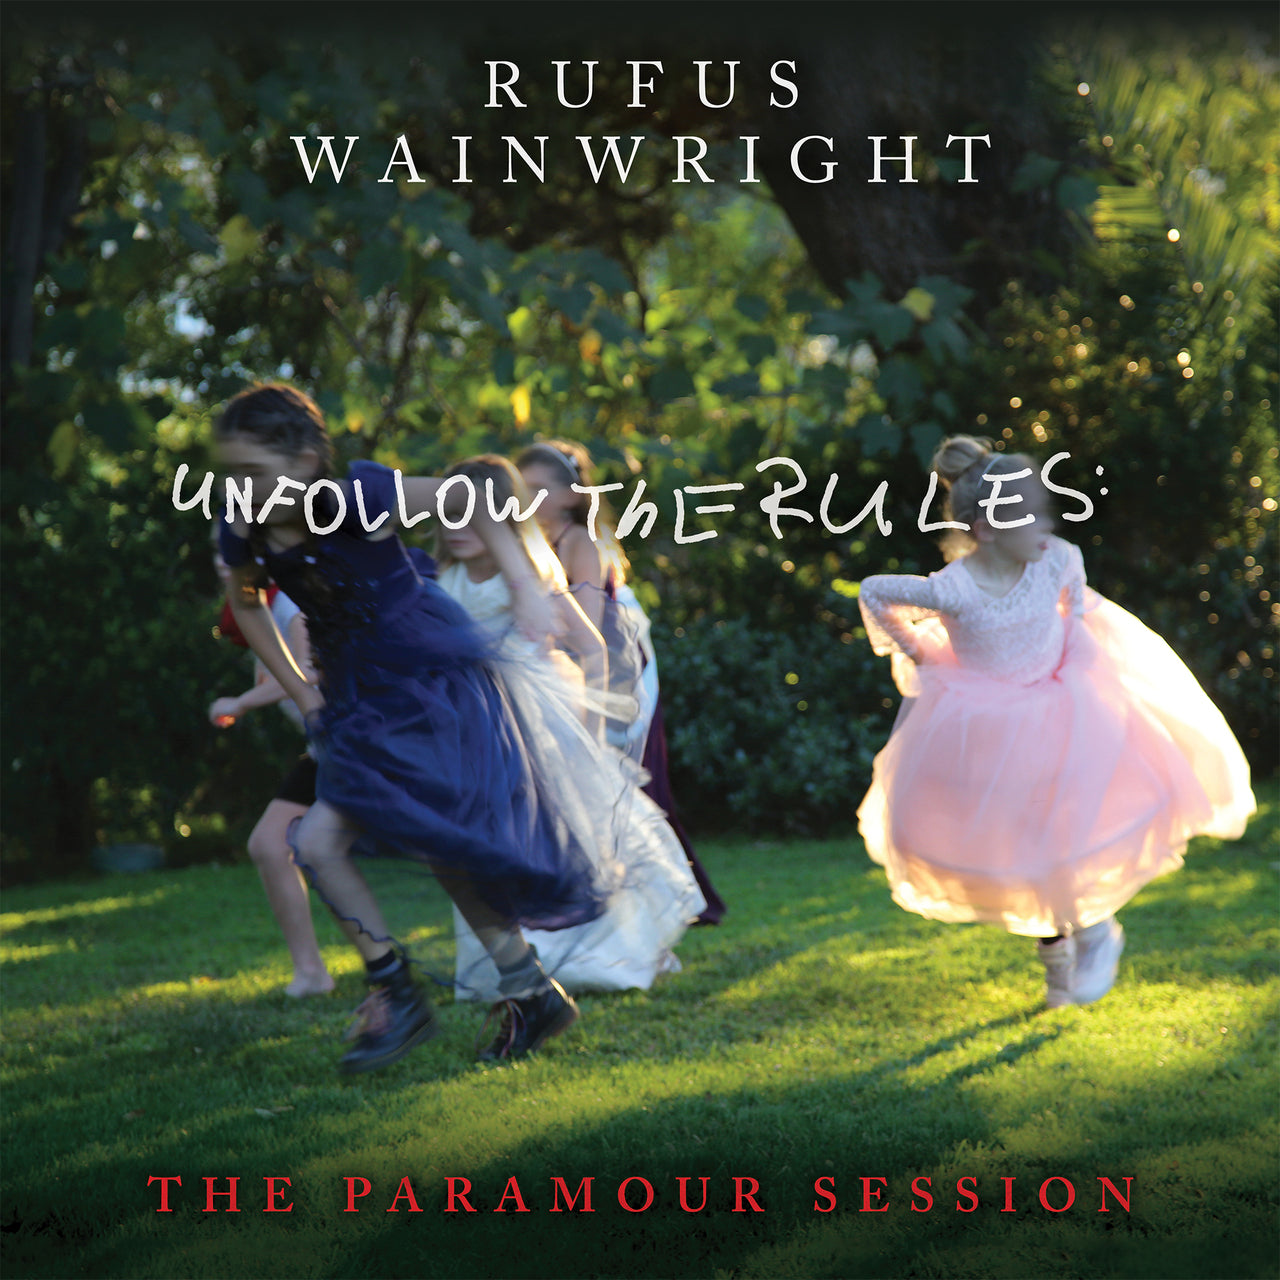 RUFUS WAINWRIGHT - Unfollow the Rules: The Paramour Session - LP - Vinyl